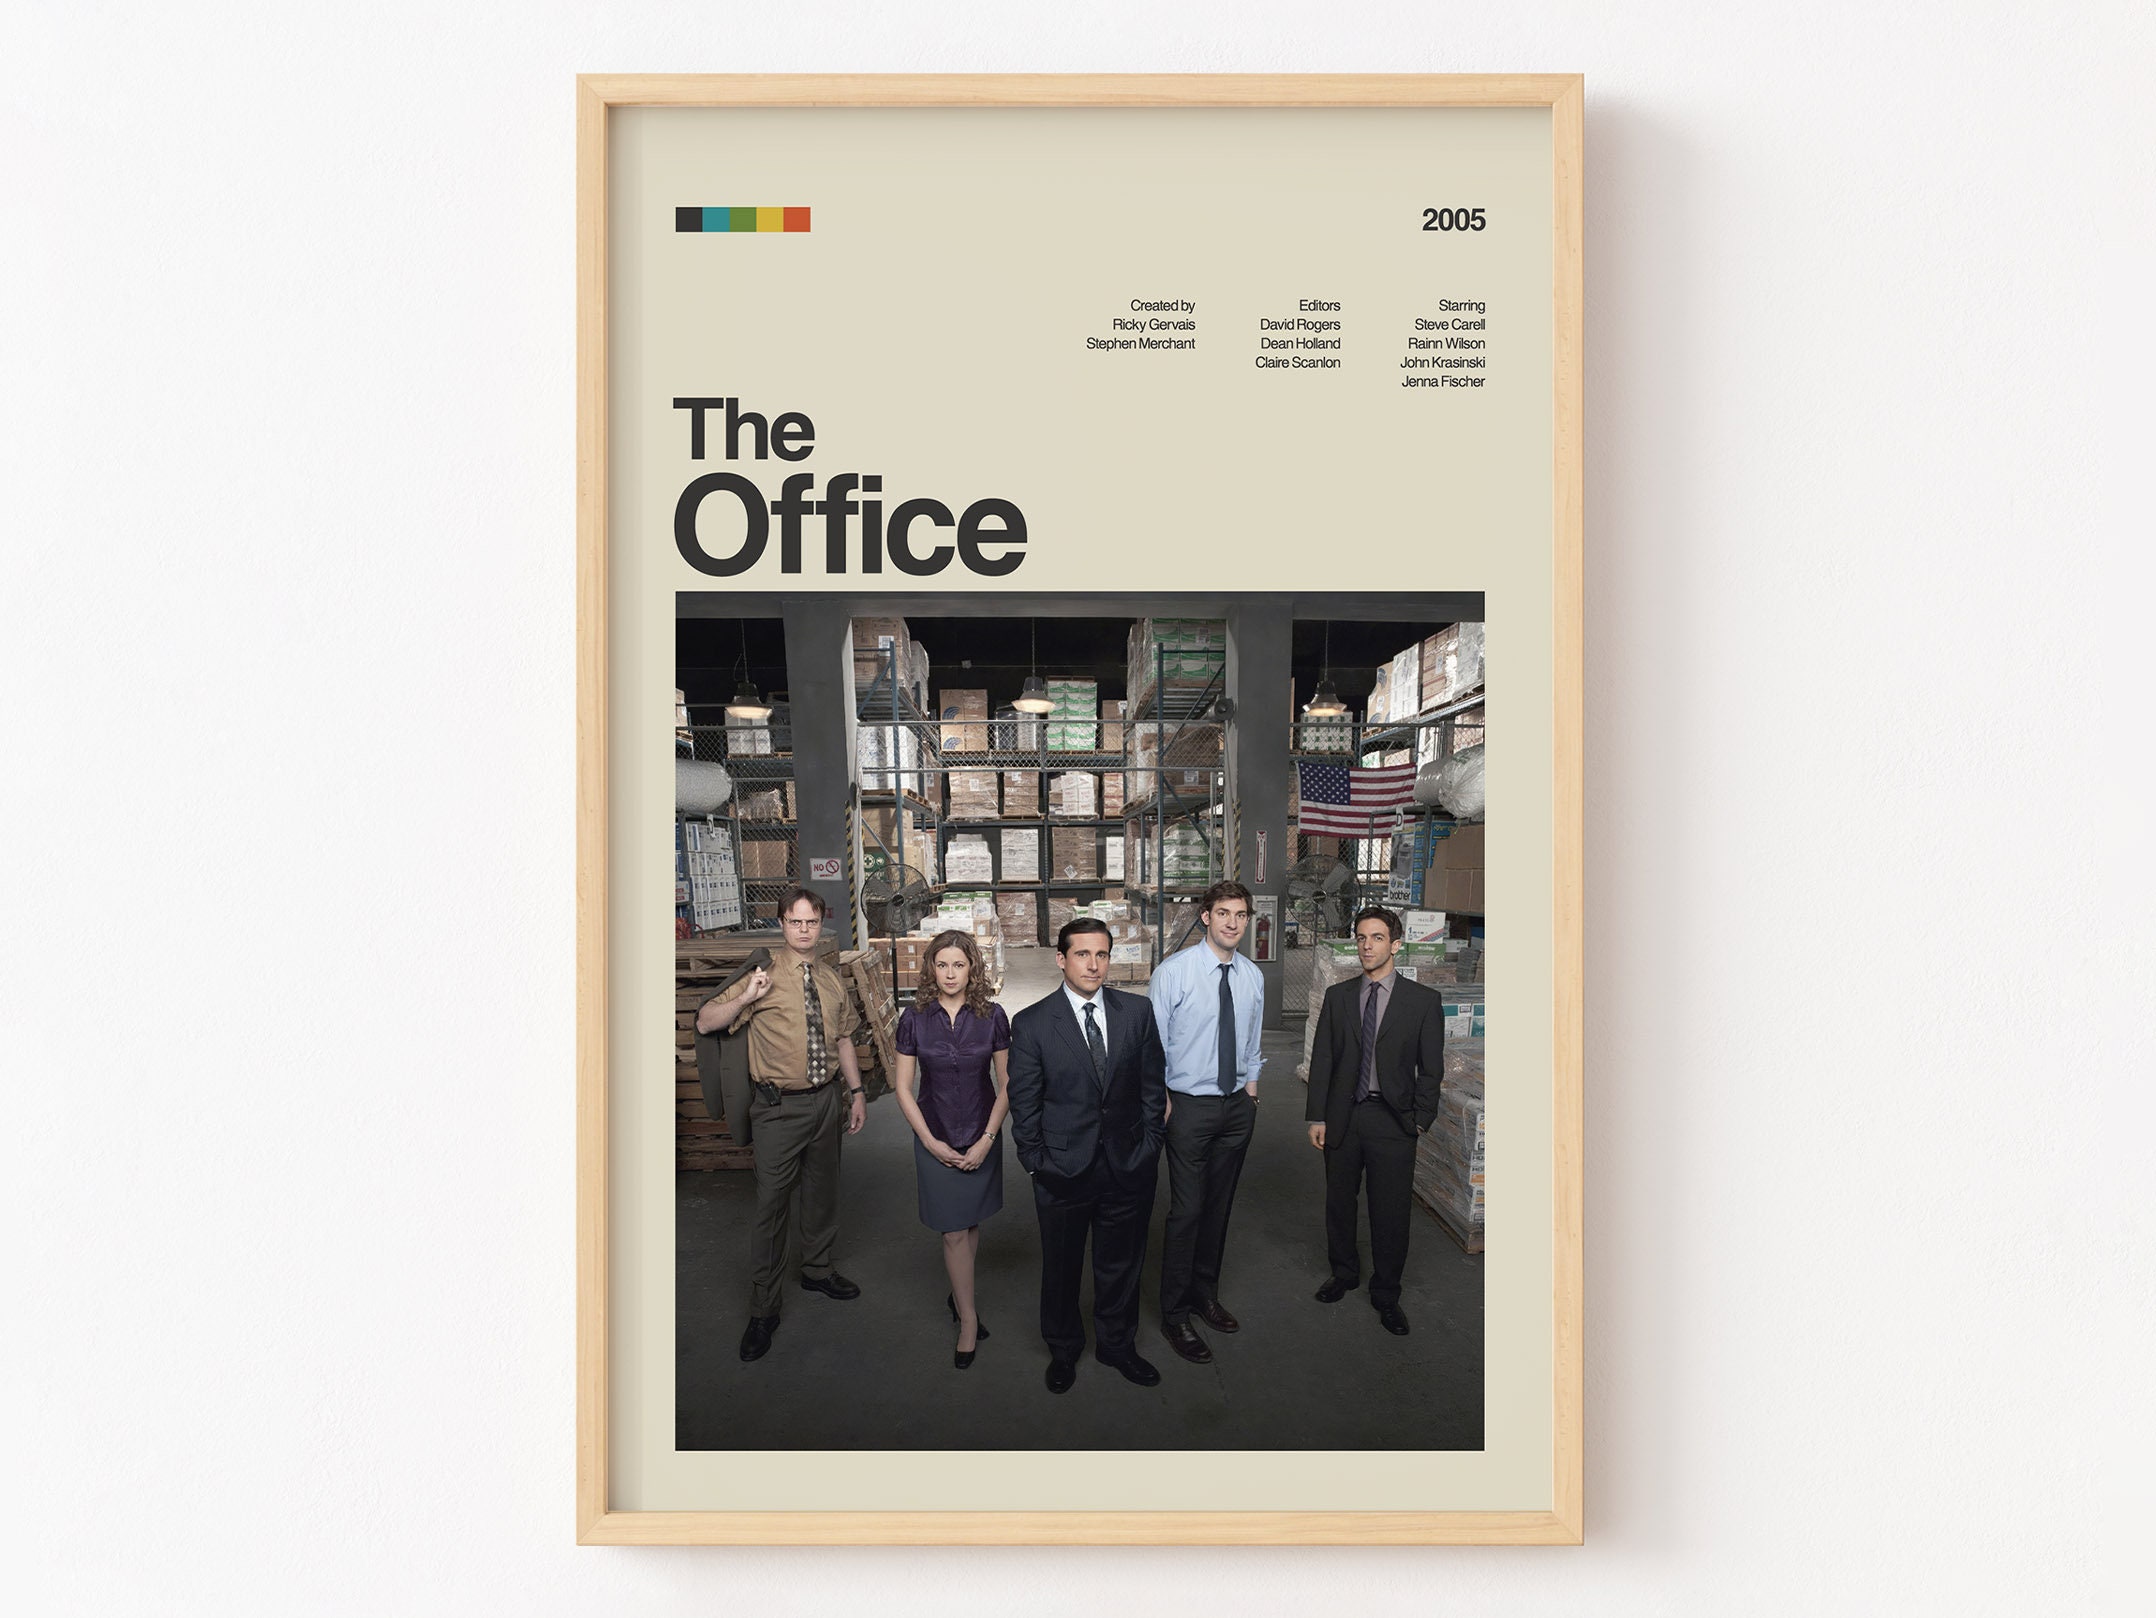 The Office Poster Print No: 2, Tv Show Poster